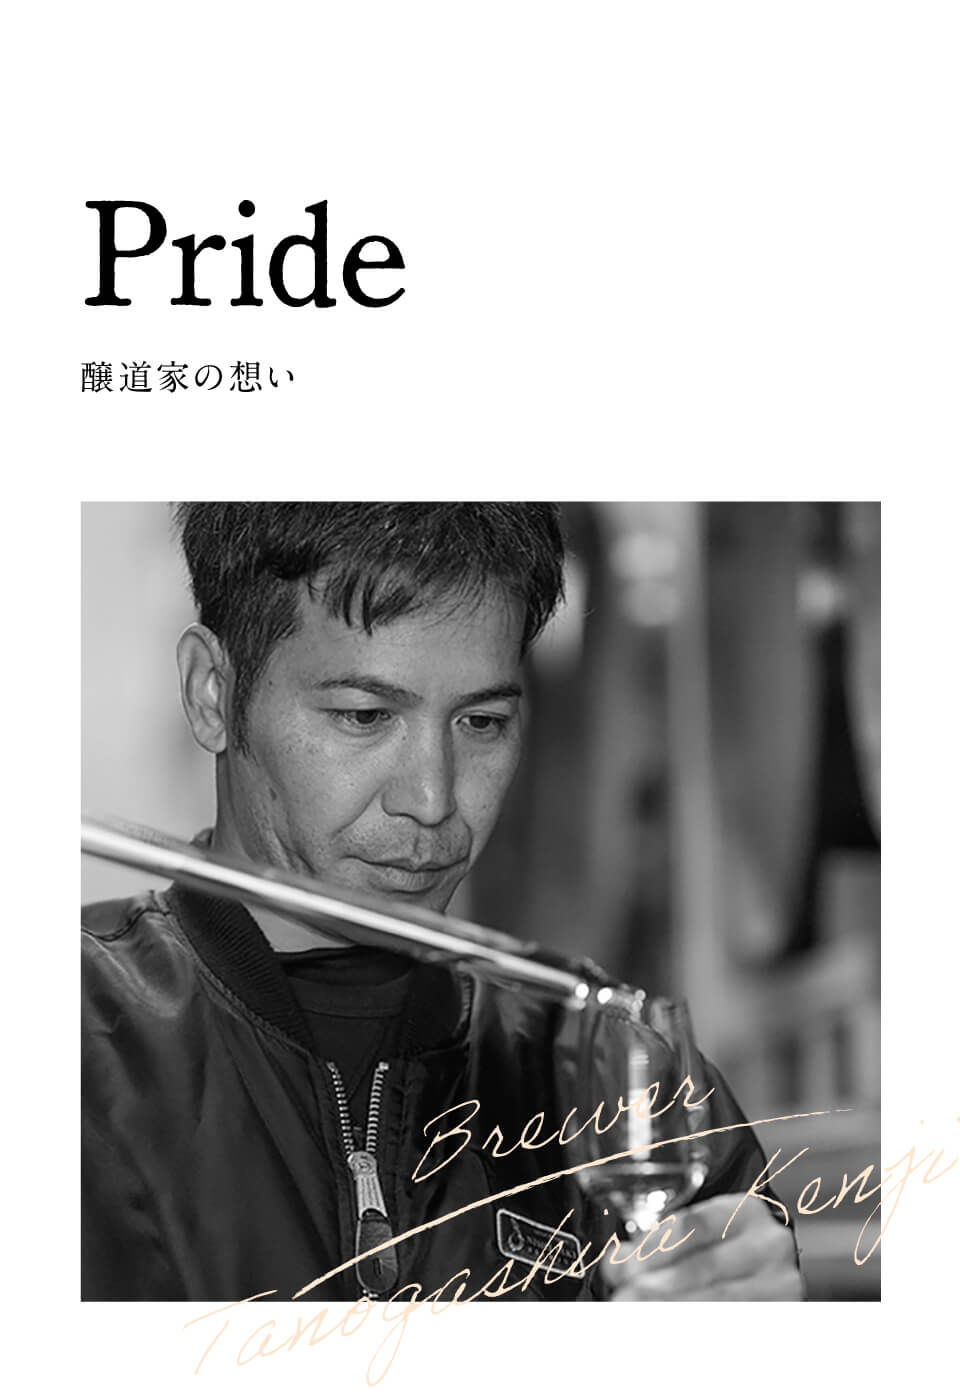 Pride醸道家の想い